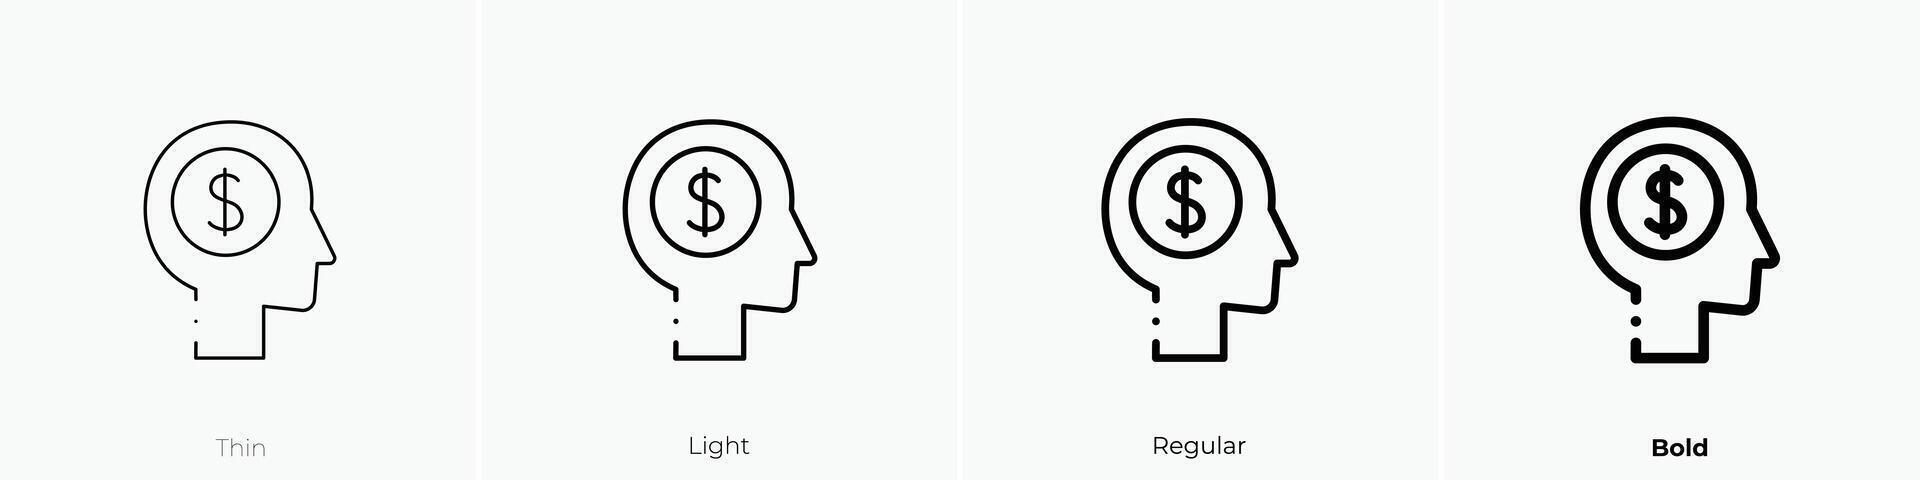 mindset icon. Thin, Light, Regular And Bold style design isolated on white background vector